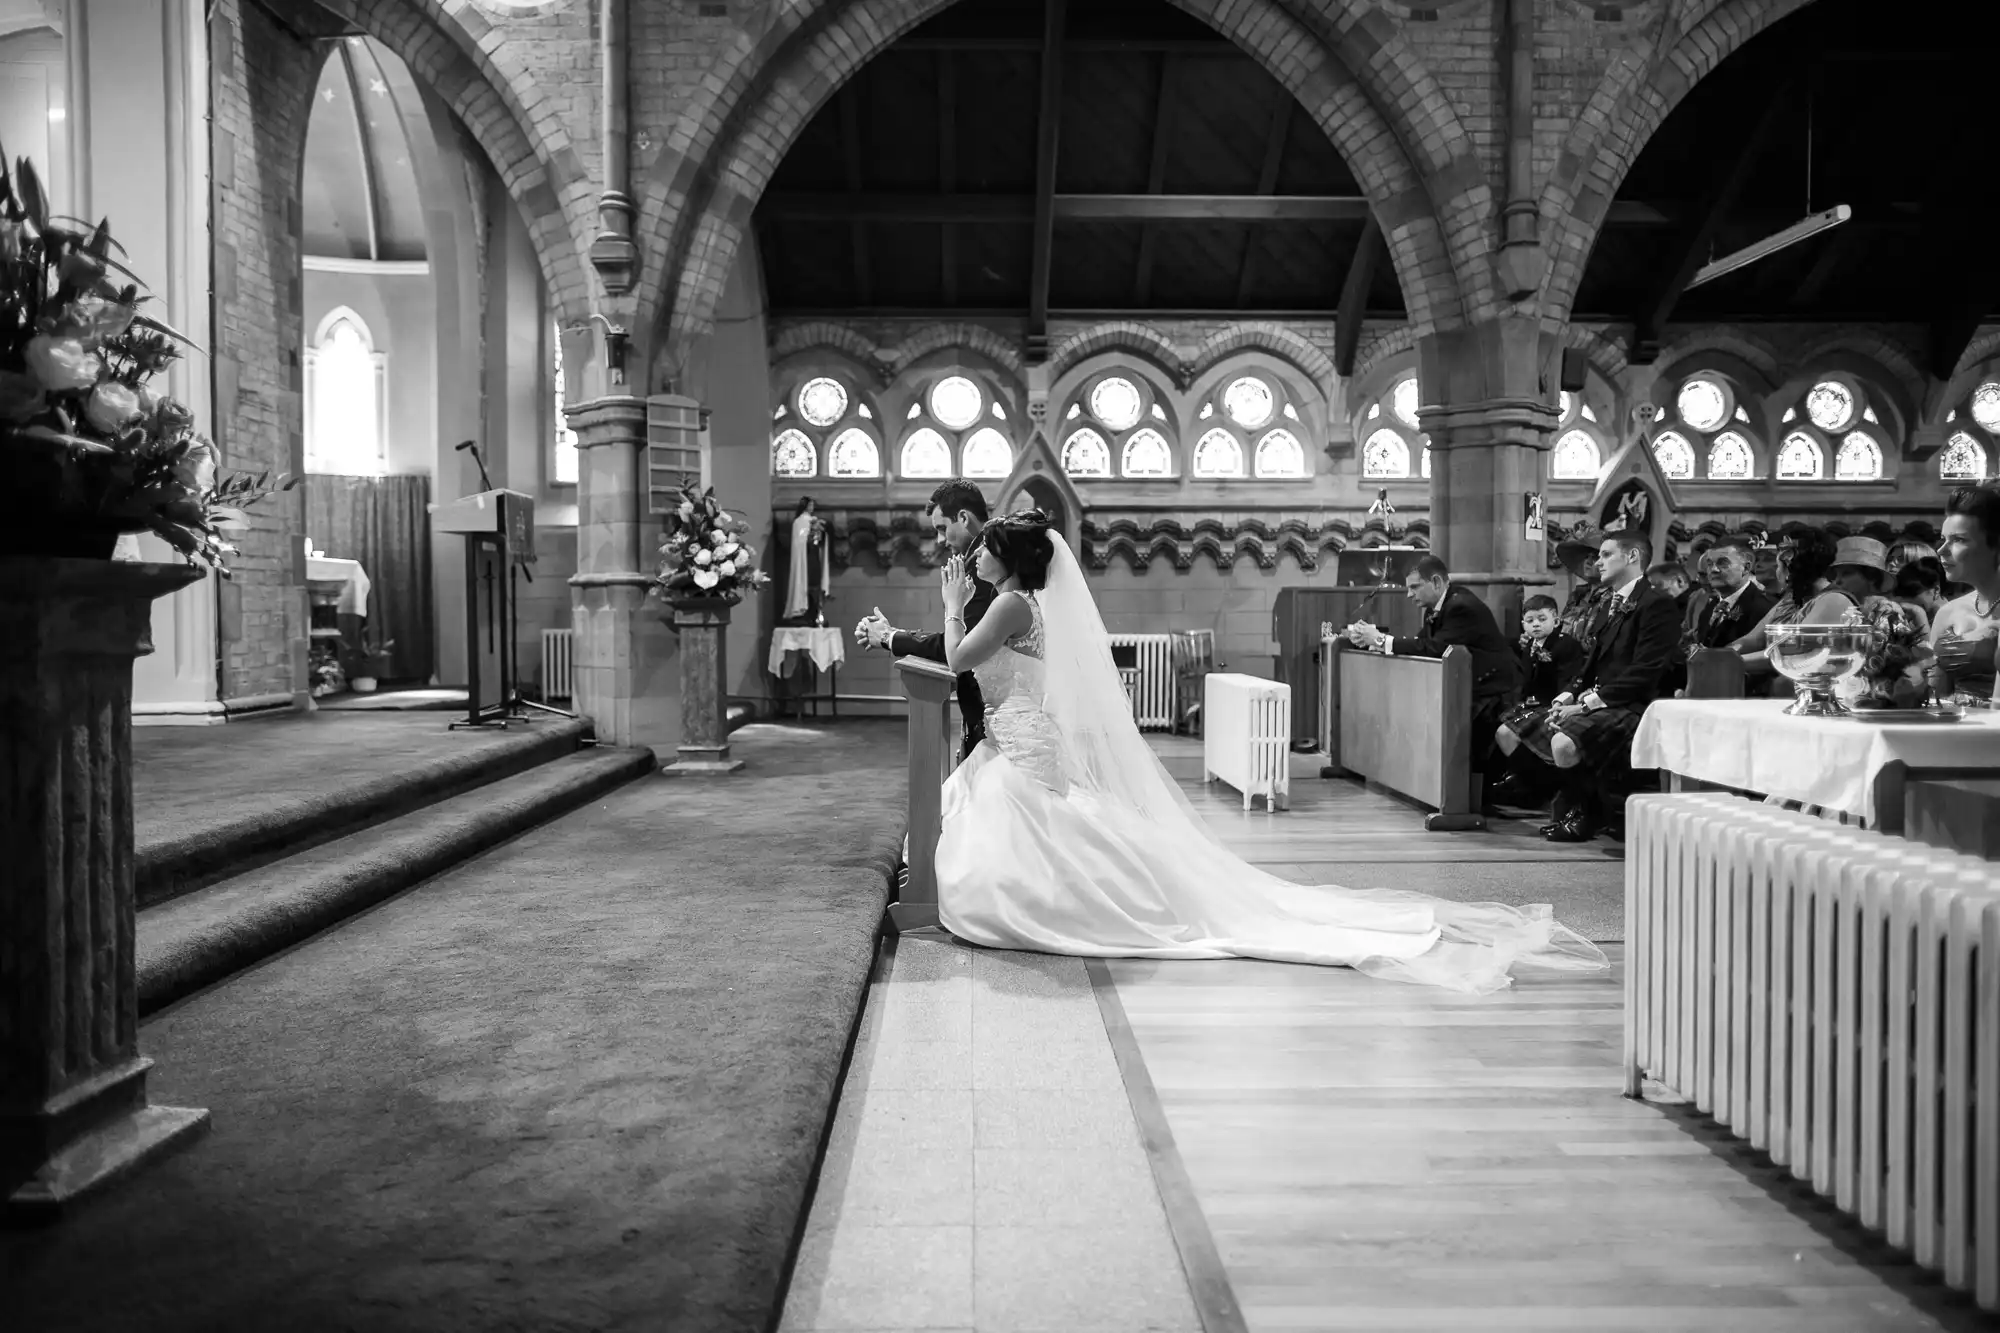 A bride and groom kneel at the altar during a wedding ceremony in a church, with guests seated around them.